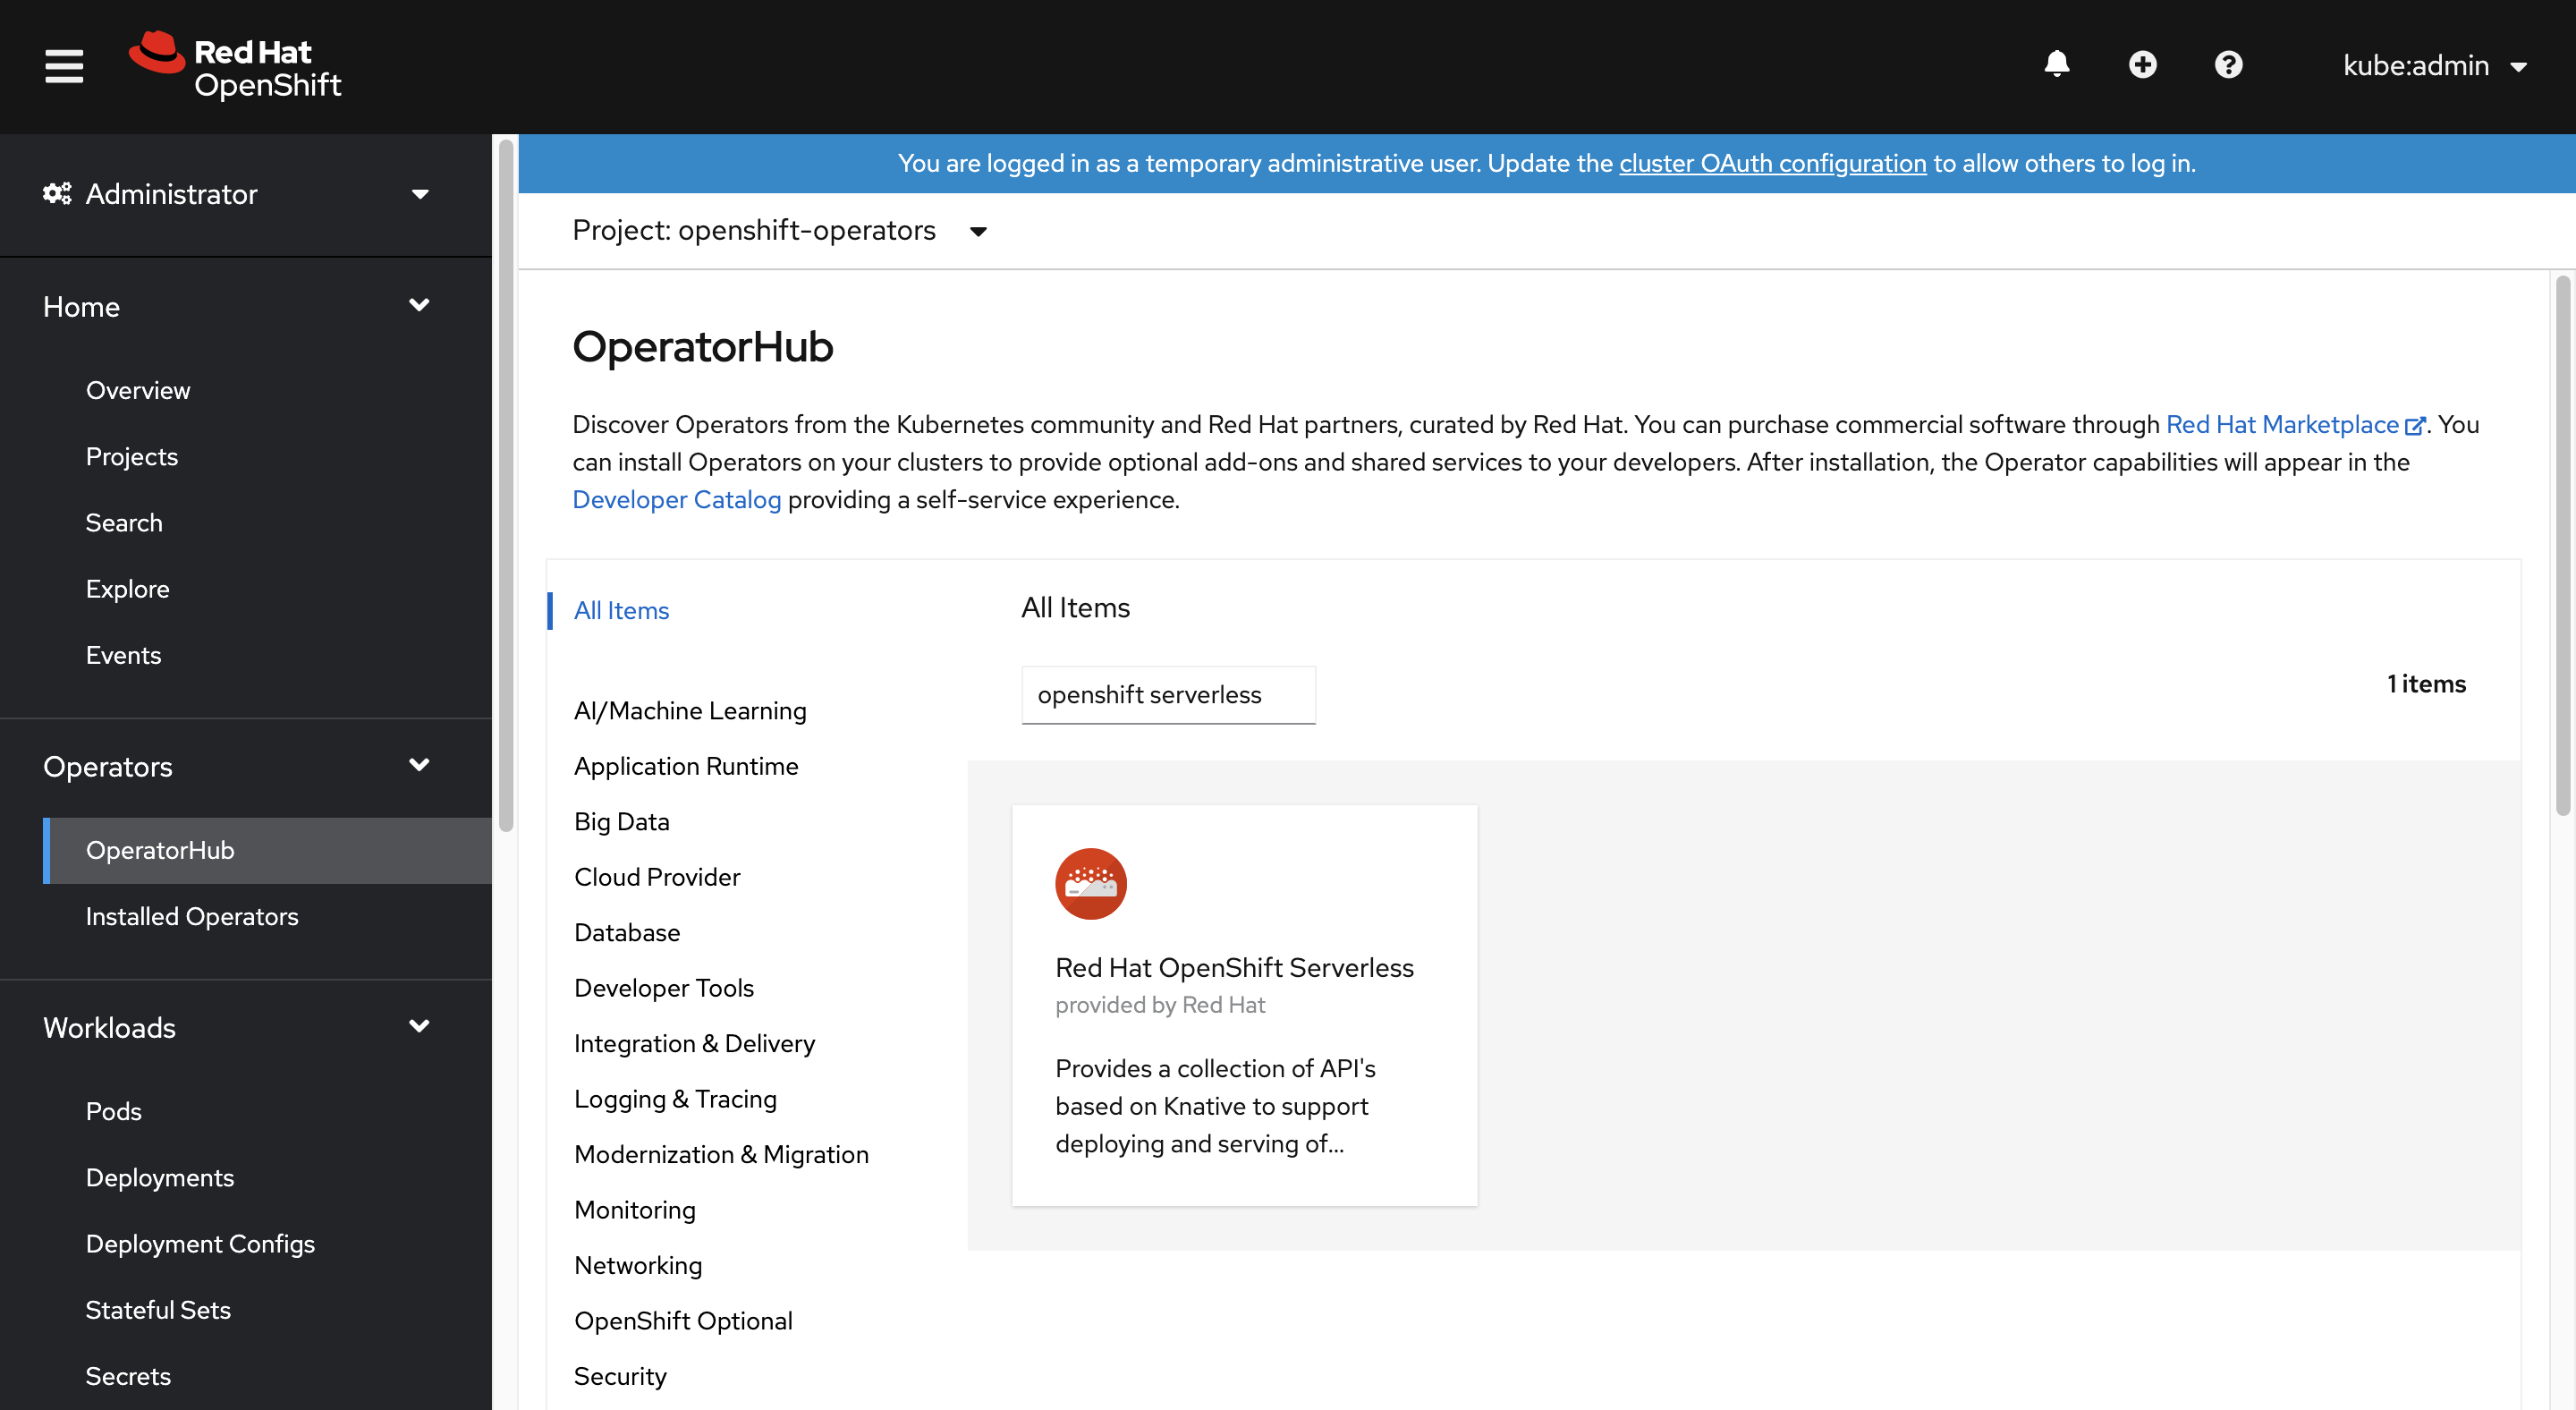 Look for the OpenShift Serverless operator